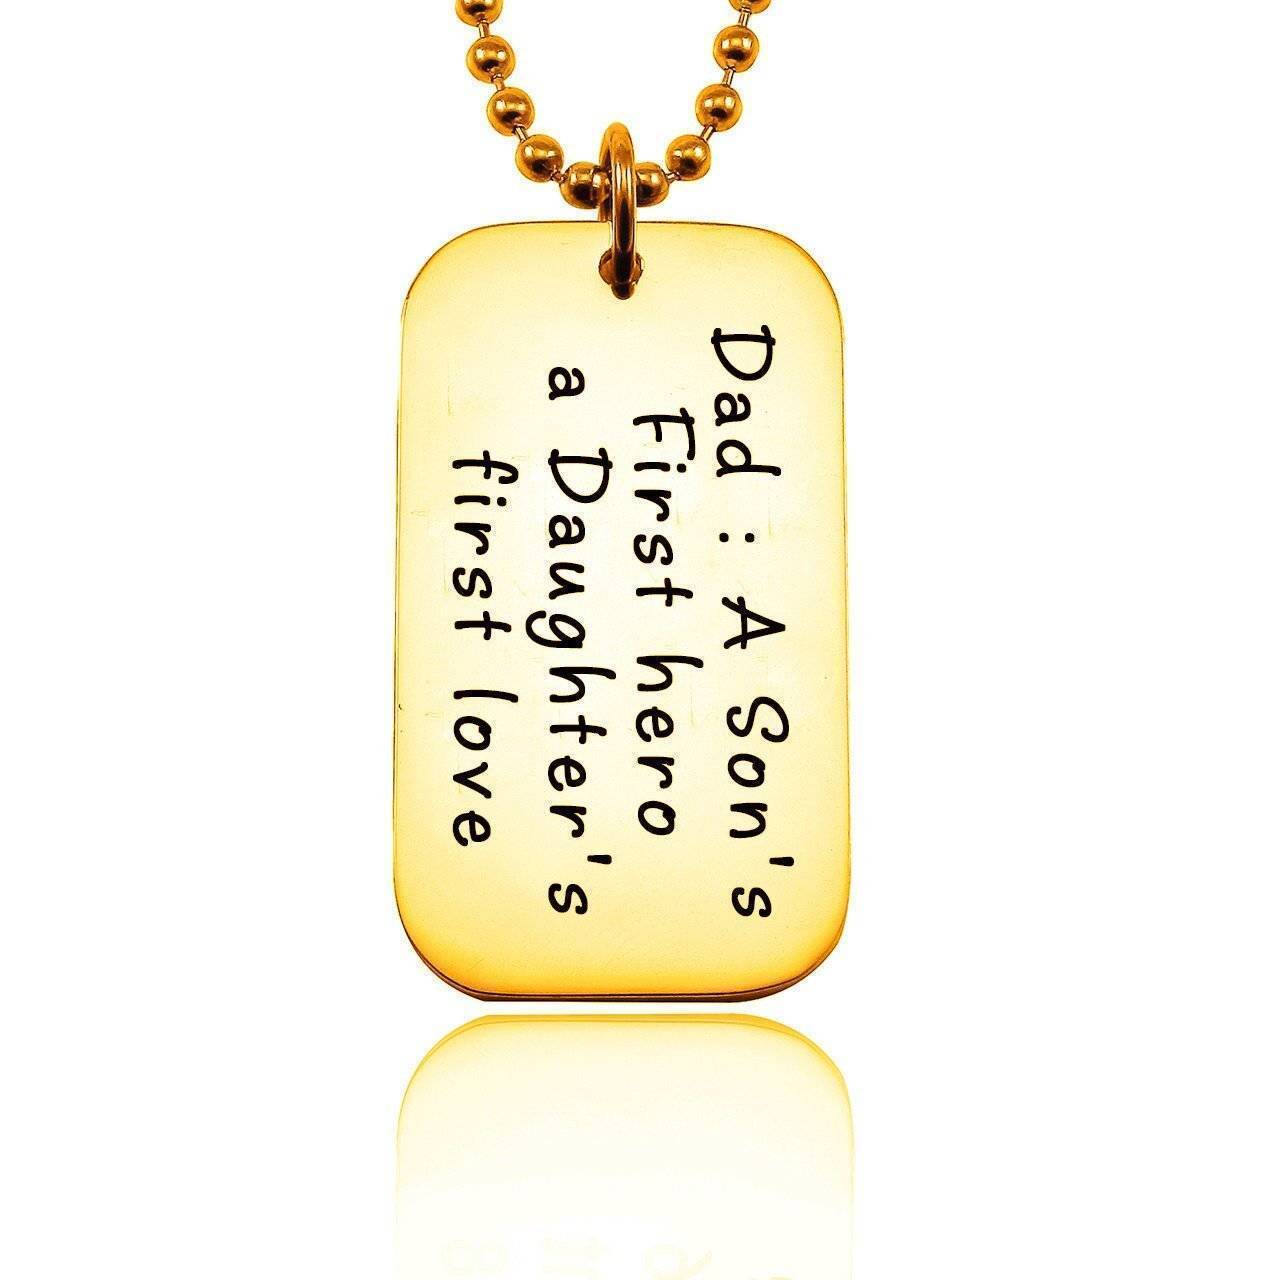 Dog Tag Necklace - First Hero - Mens Jewellery by Belle Fever